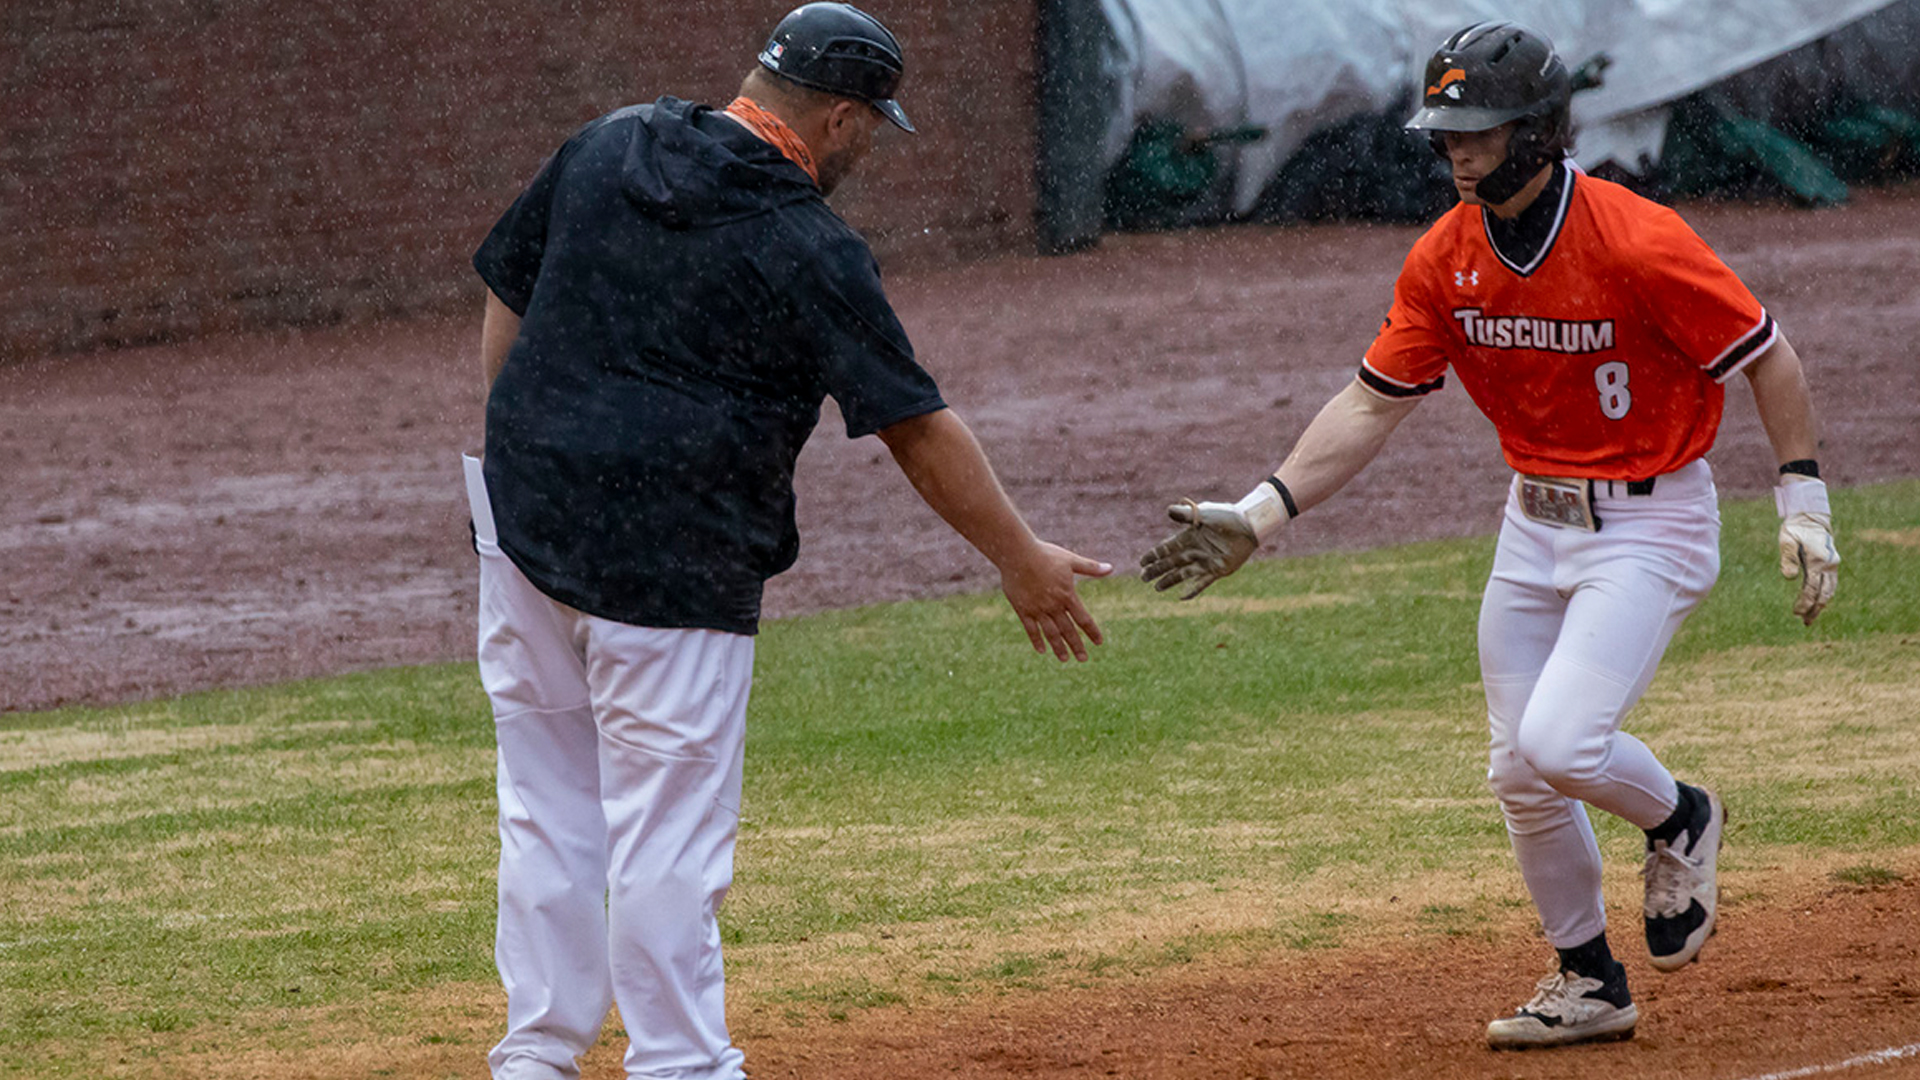 Reynolds homers twice, Pioneers win 9-5 at Carson-Newman in non-conference game